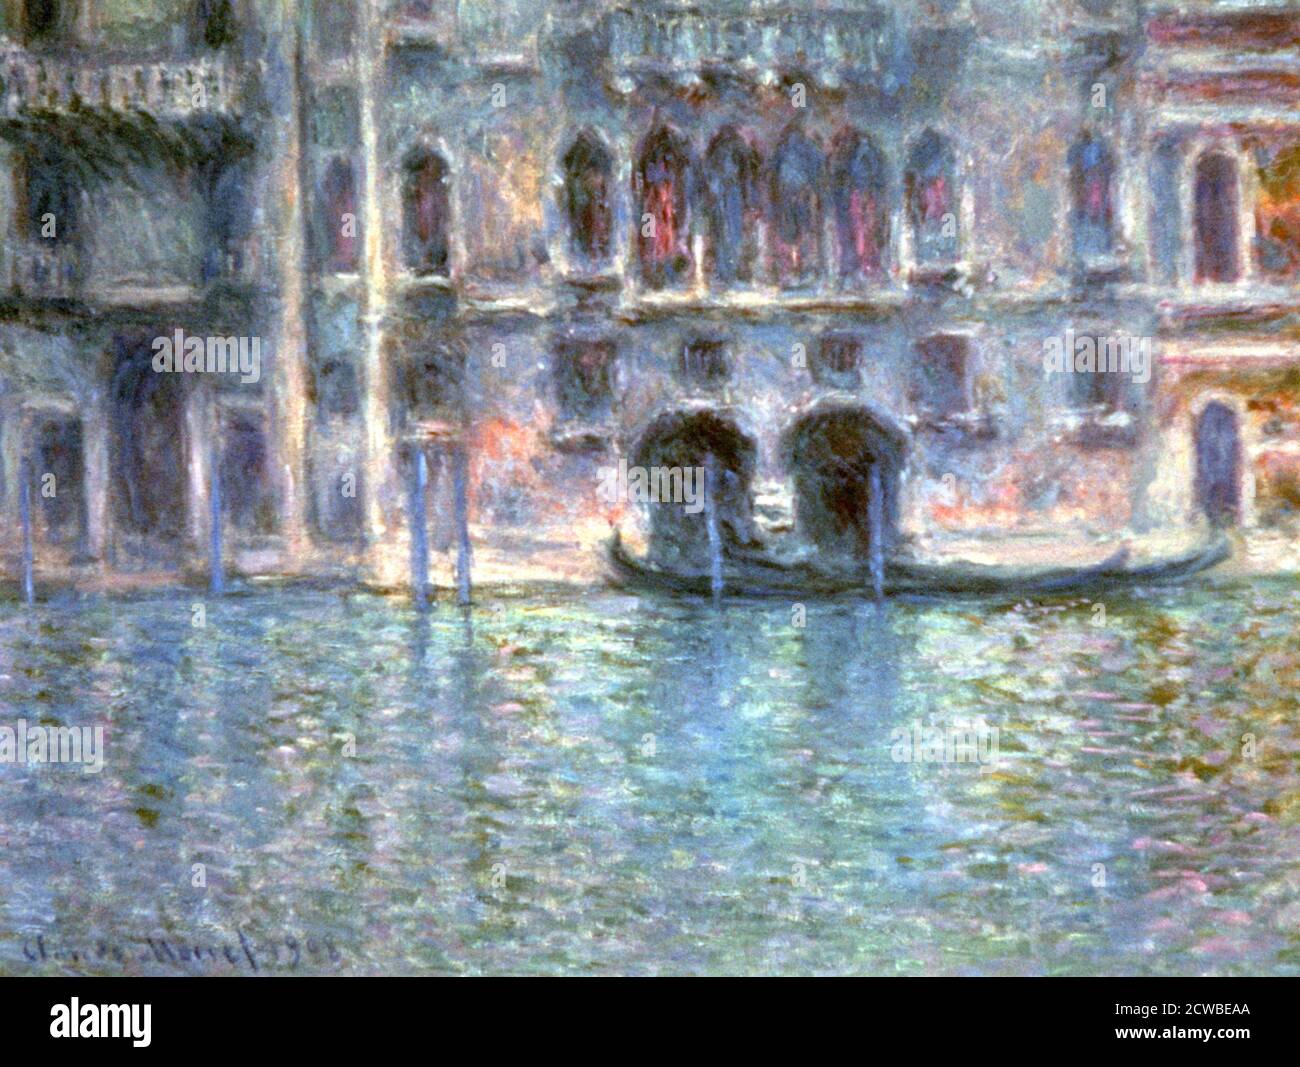 Venice, Palazzo Da Mula', 1908. Artist: Claude Monet. Monet was a French painter, a founder of French Impressionist painting and the most consistent and prolific practitioner of the movements philosophy. Stock Photo